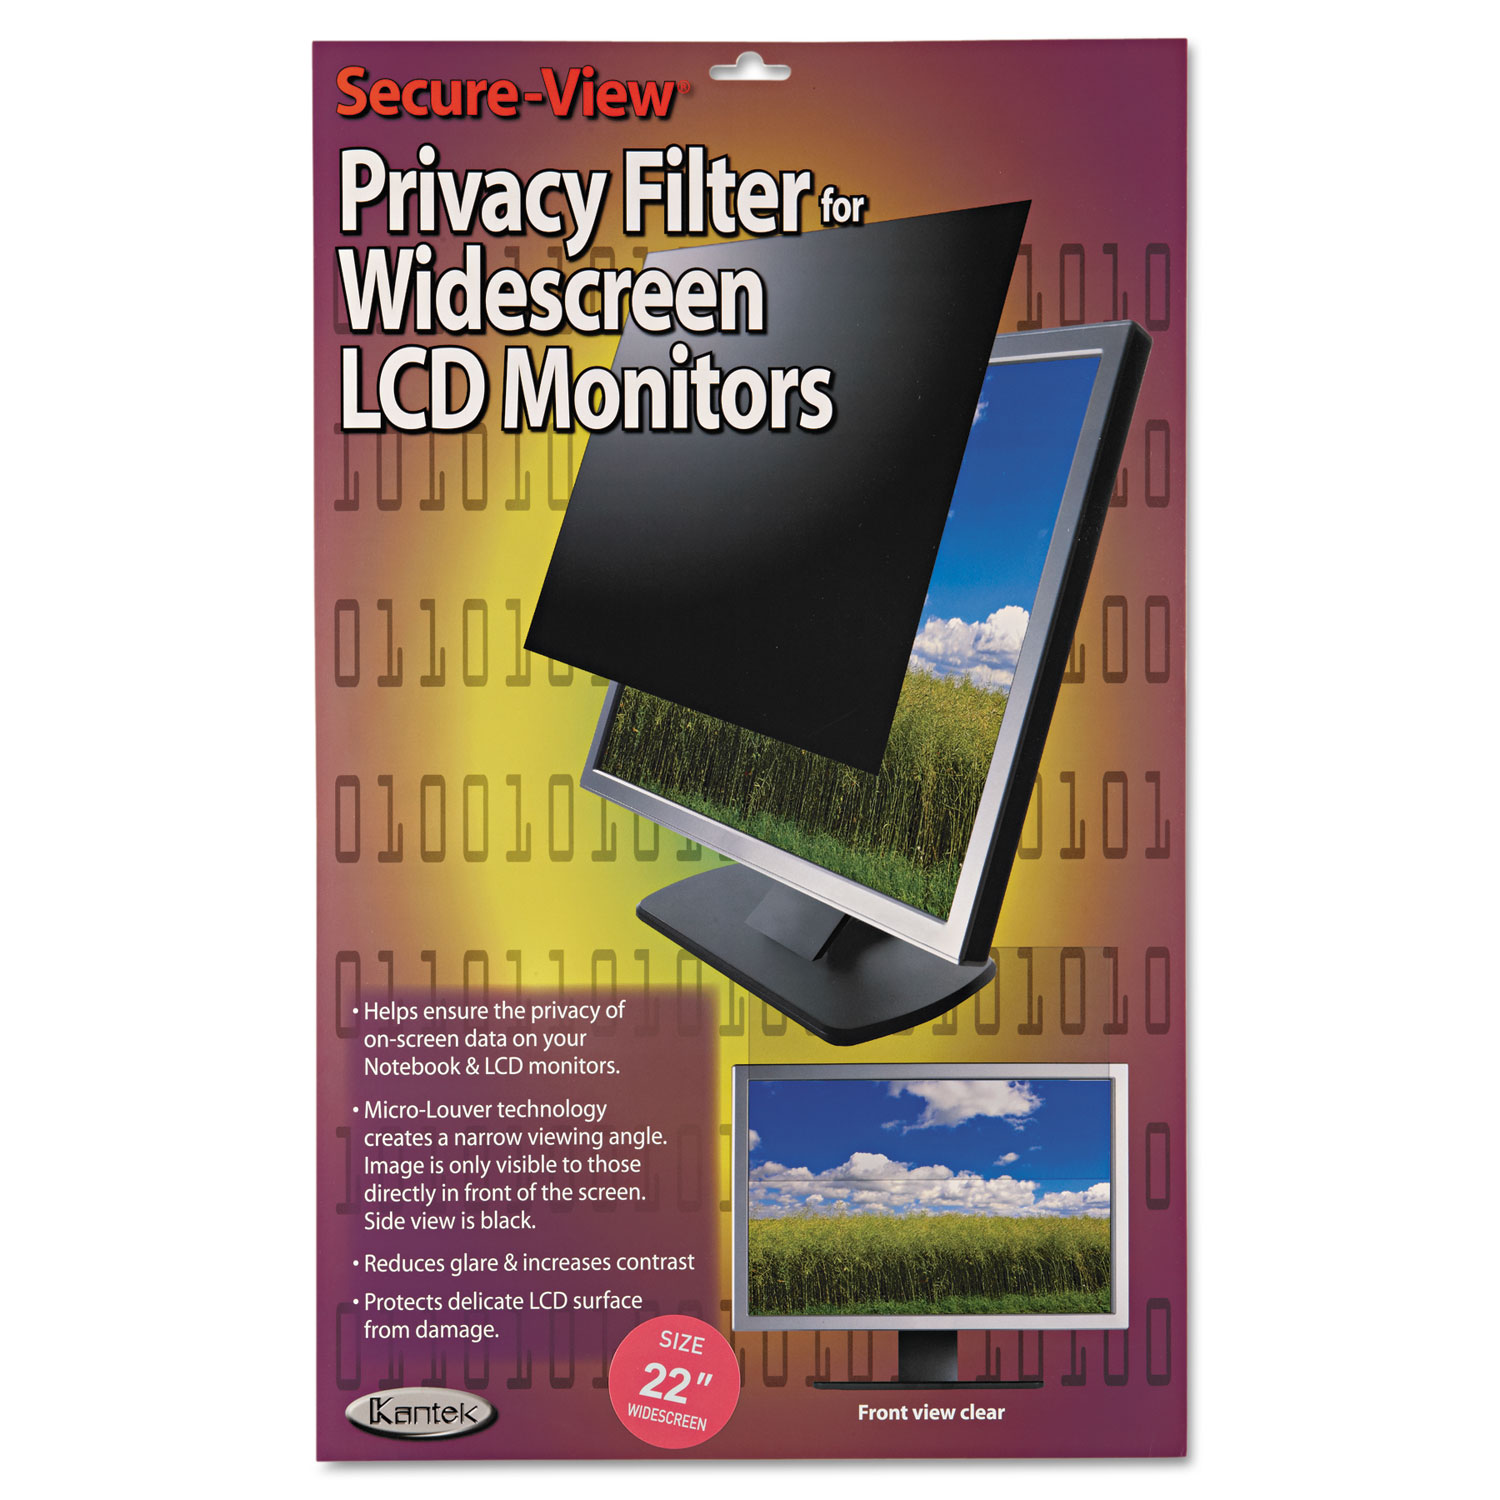 Secure View LCD Privacy Filter For 24" Widescreen 16.9 Aspect Ratio - image 3 of 8